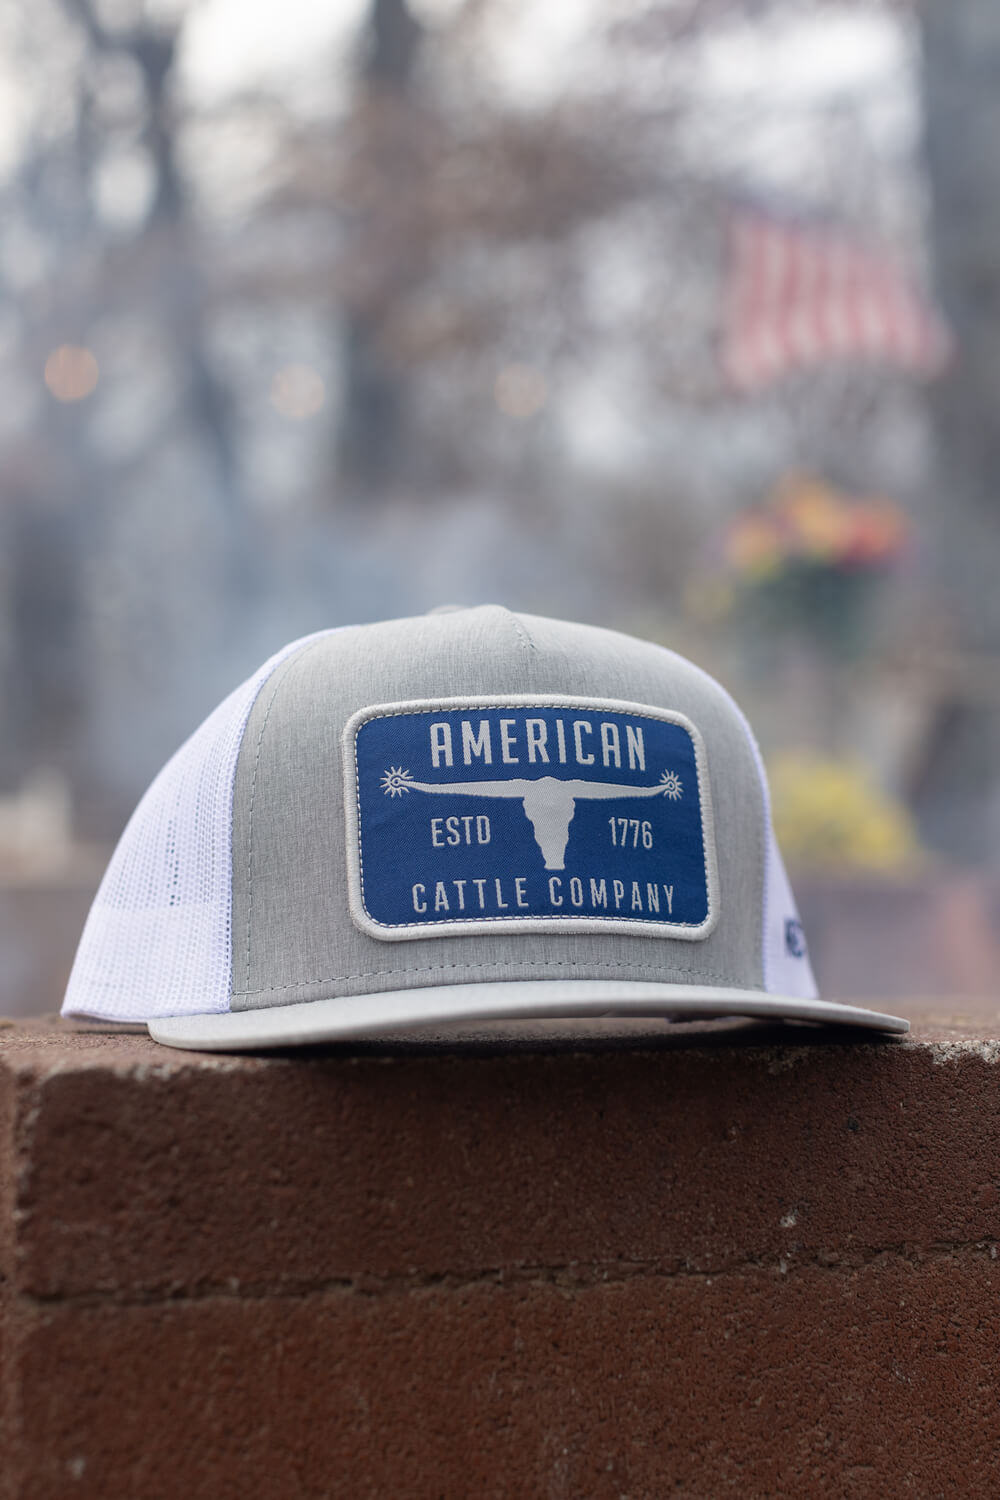 The Bull Spurs Hat-Flat by Rural Cloth is a stylish gray and white trucker hat with a flat bill, adorned with a blue and white patch on the front. The patch displays "American Cattle Company," "ESTD 1776," along with an image of a cow's head. The hat rests on a brown brick surface, with blurred outdoor scenery in the backdrop.